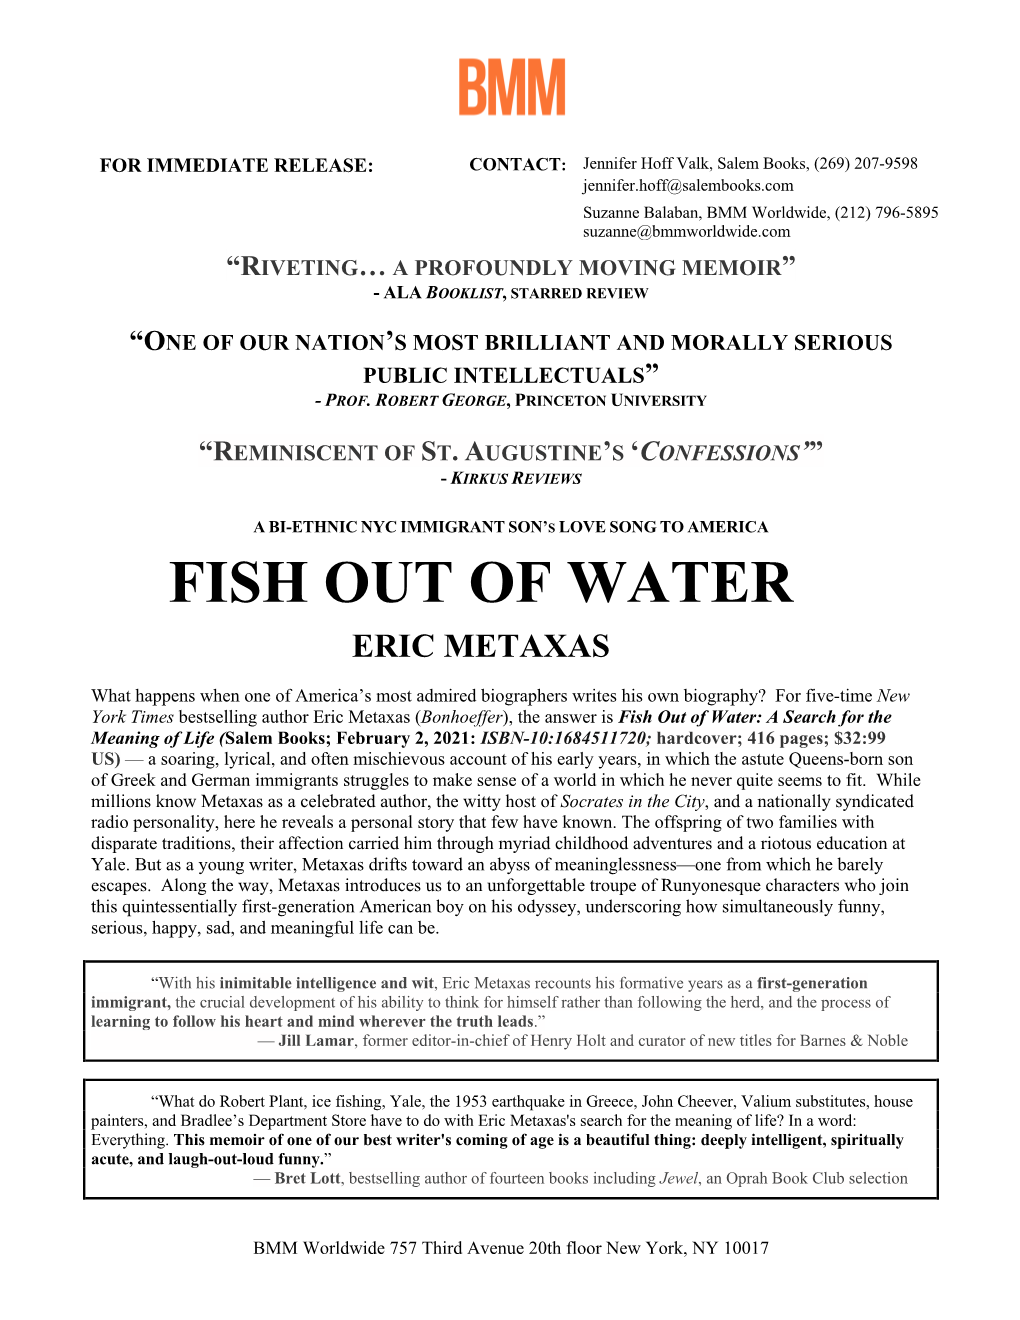 Fish out of Water Eric Metaxas